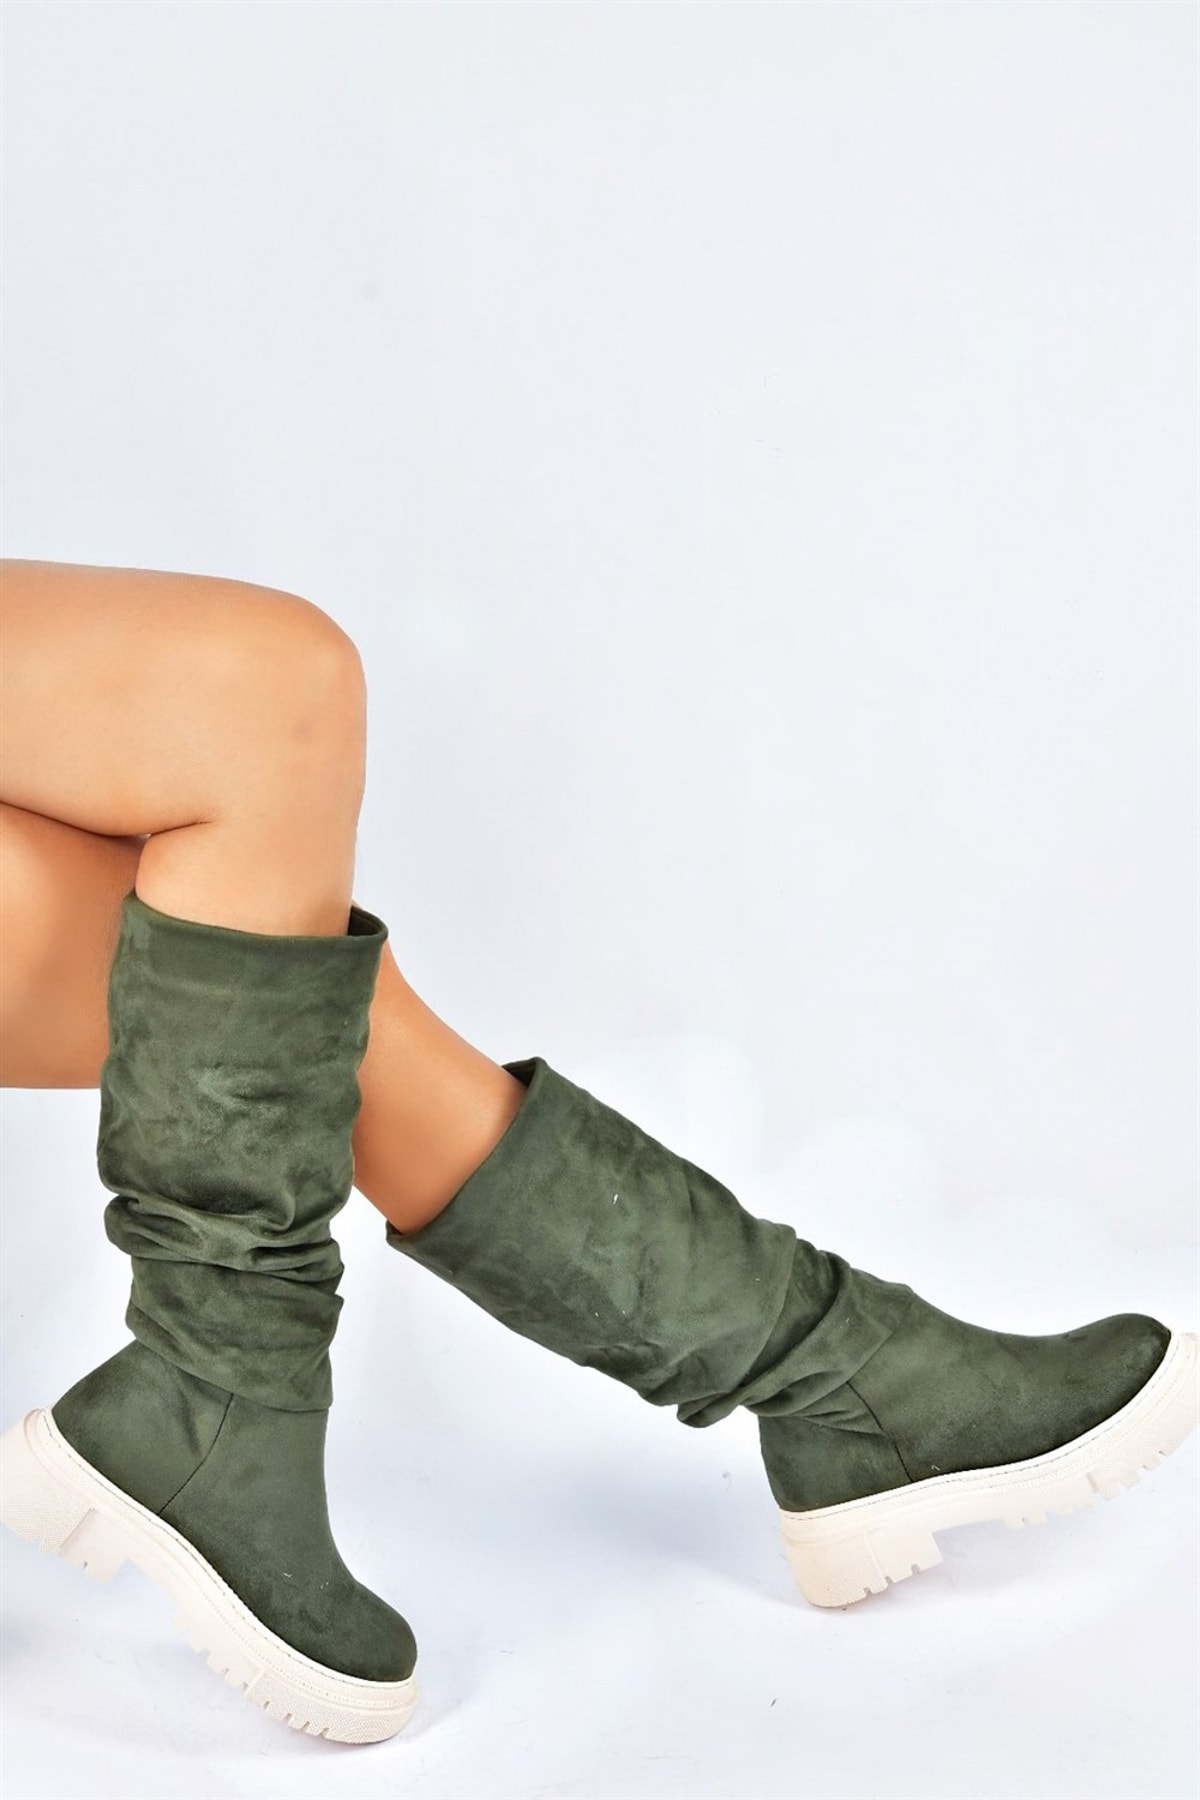 Fox Shoes Women's Green Suede Gathered Daily Boots